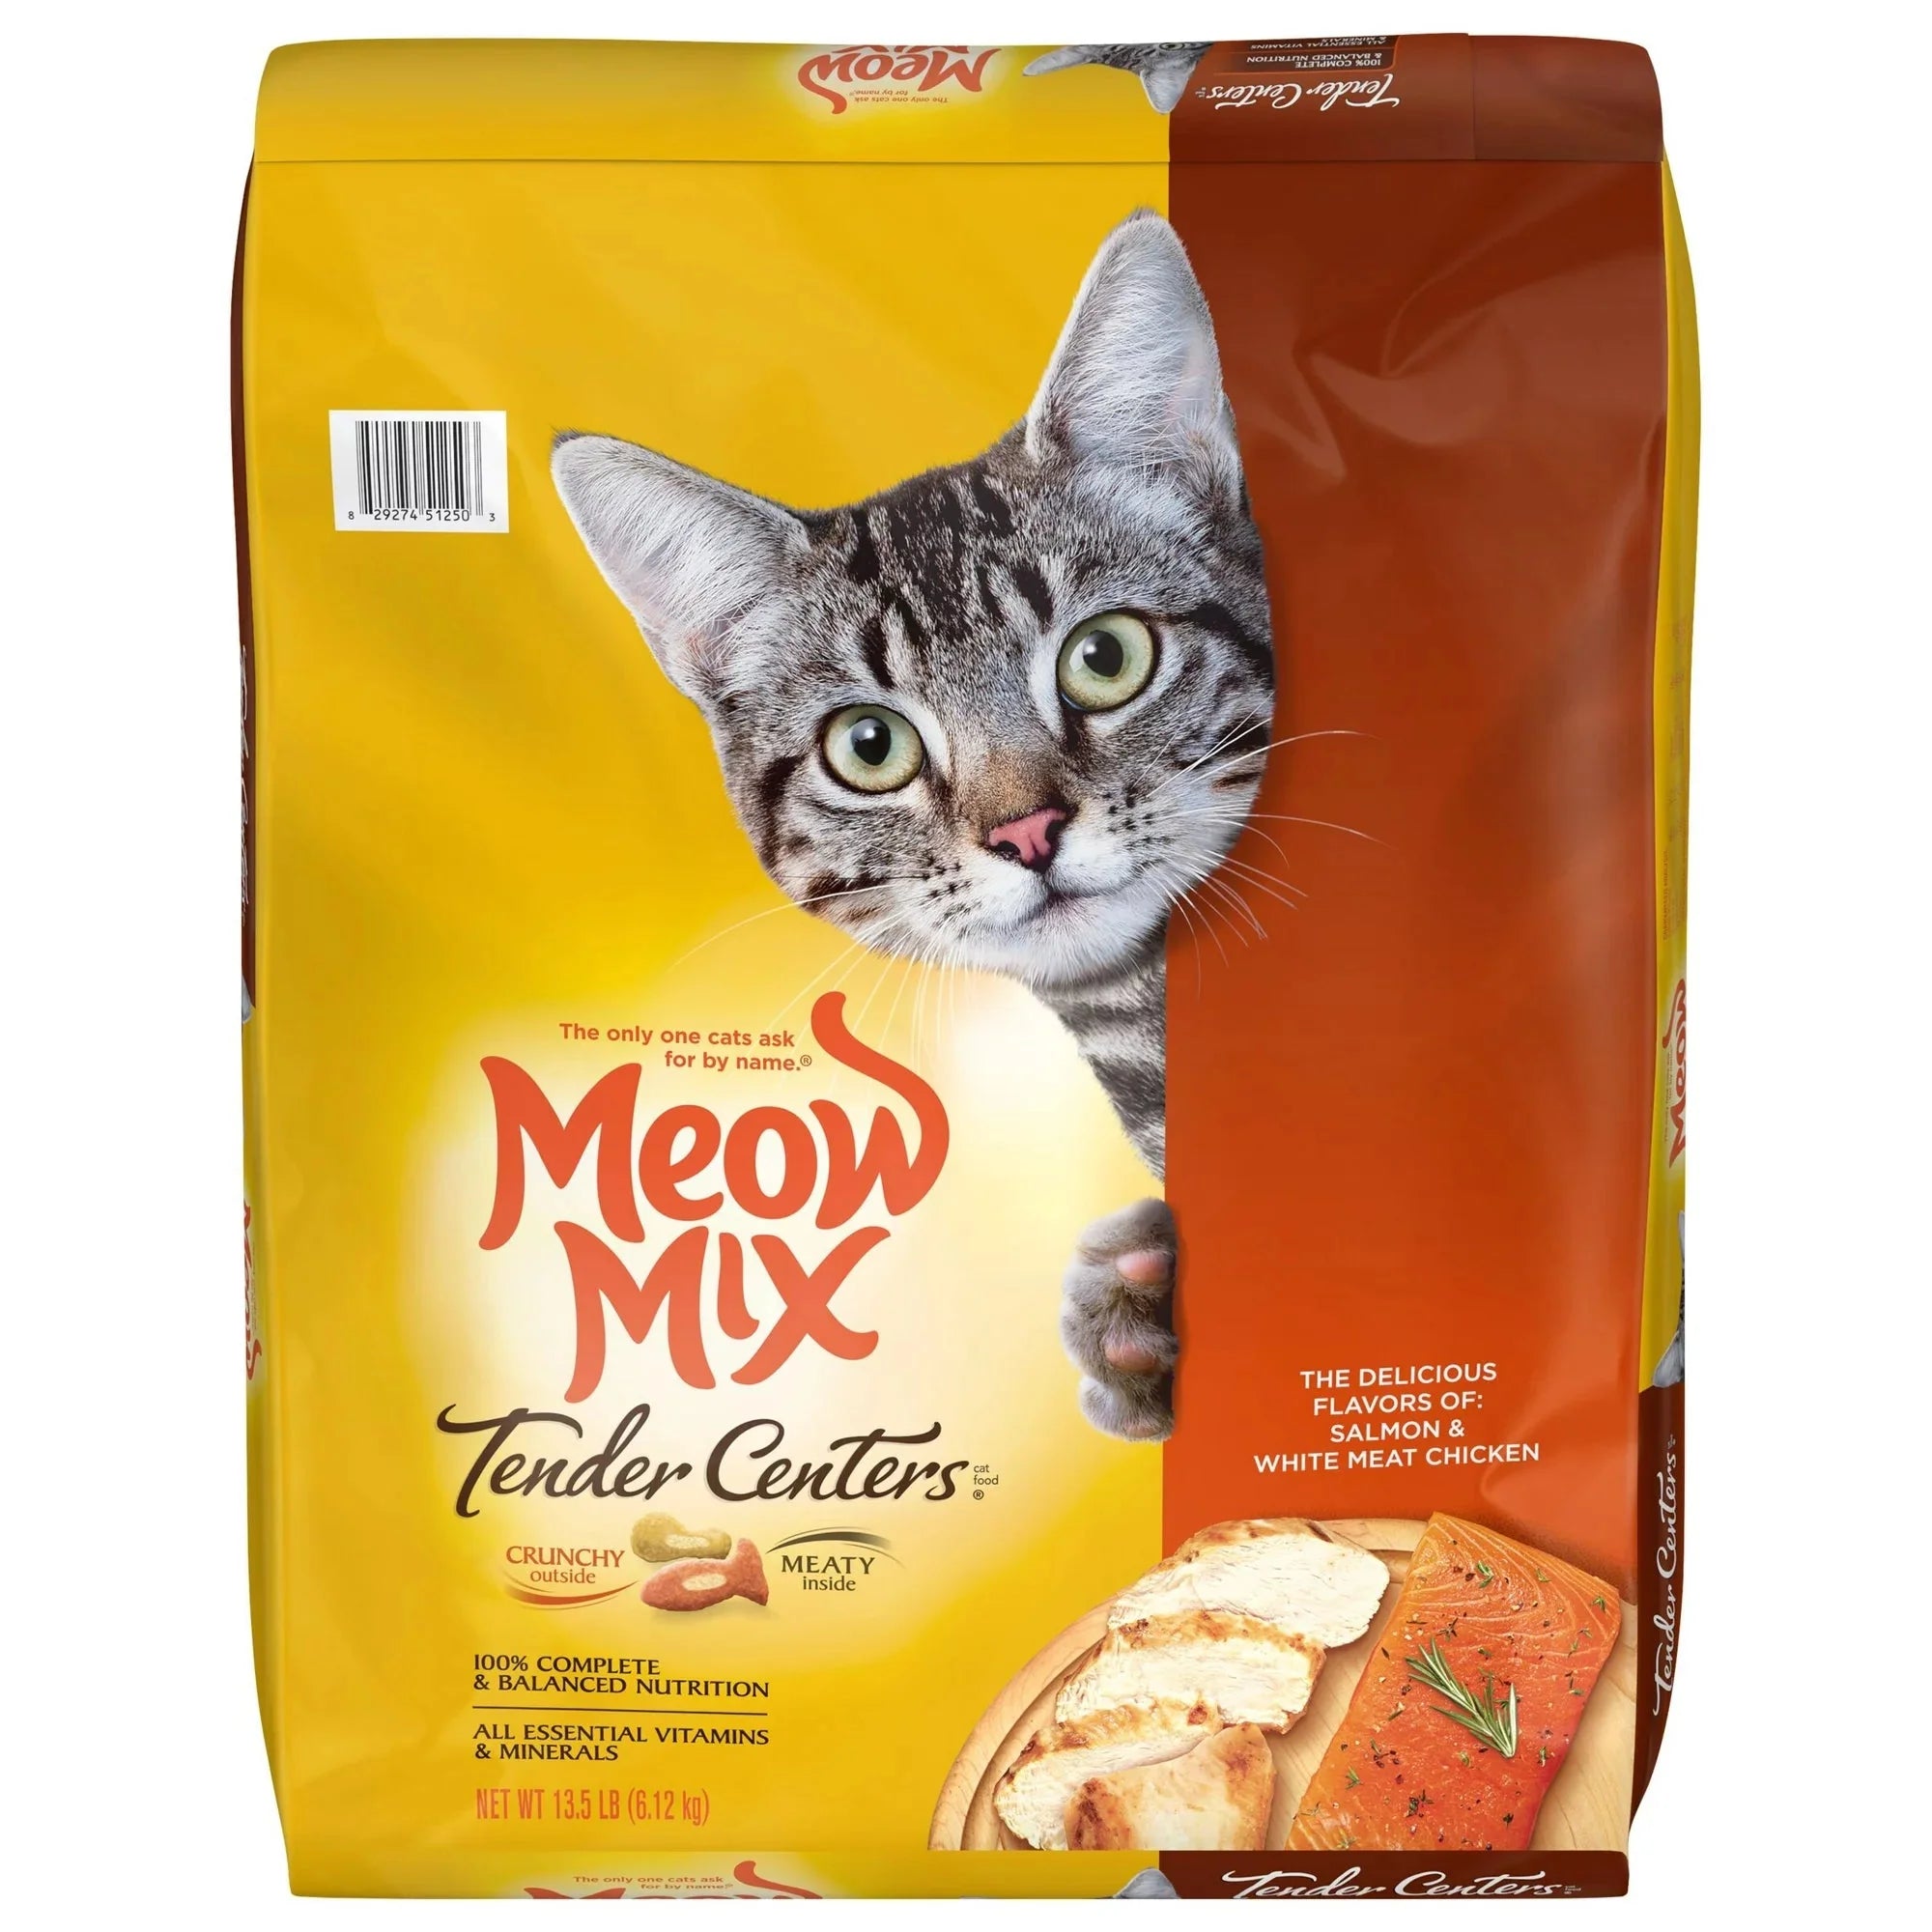 Wholesale prices with free shipping all over United States Meow Mix Tender Centers Salmon & White Meat Chicken Dry Cat Food, 13.5 Pounds - Steven Deals